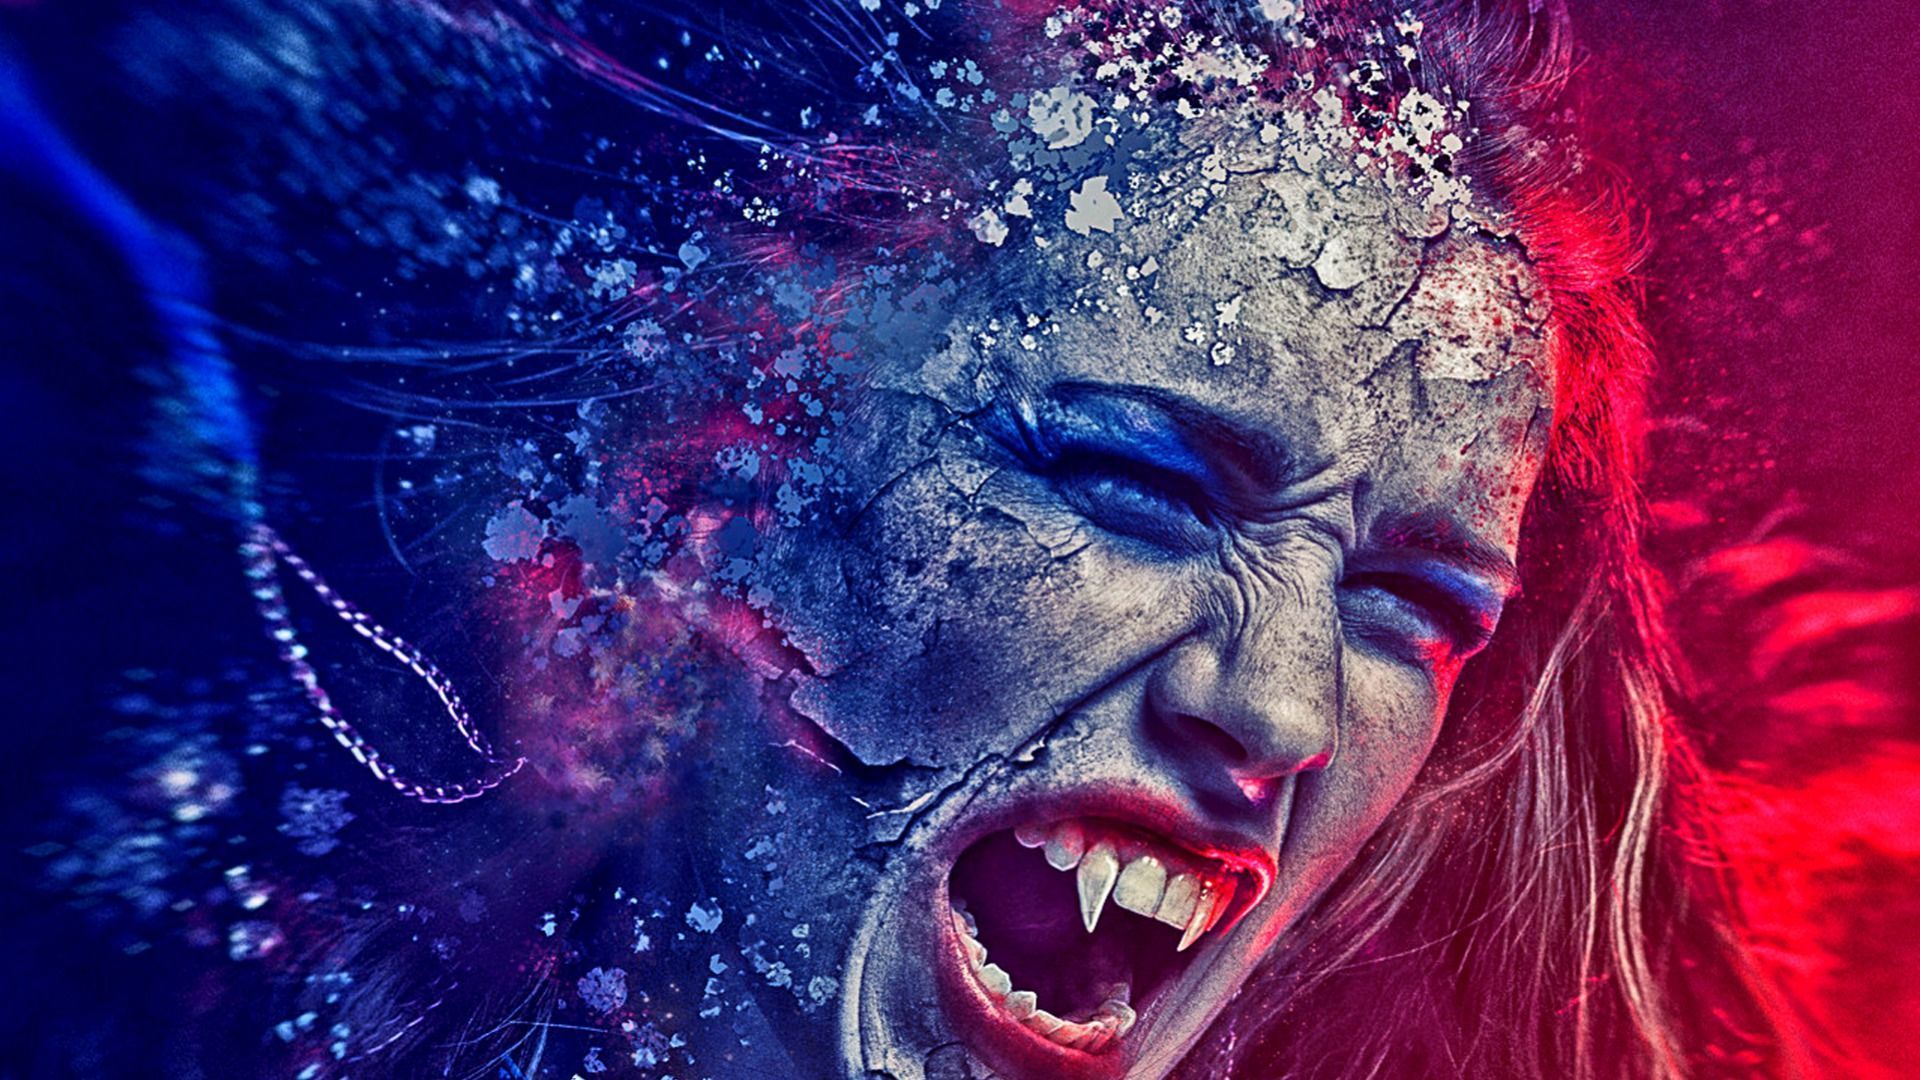 Download 1920x1080 Angry female vampire wallpaper